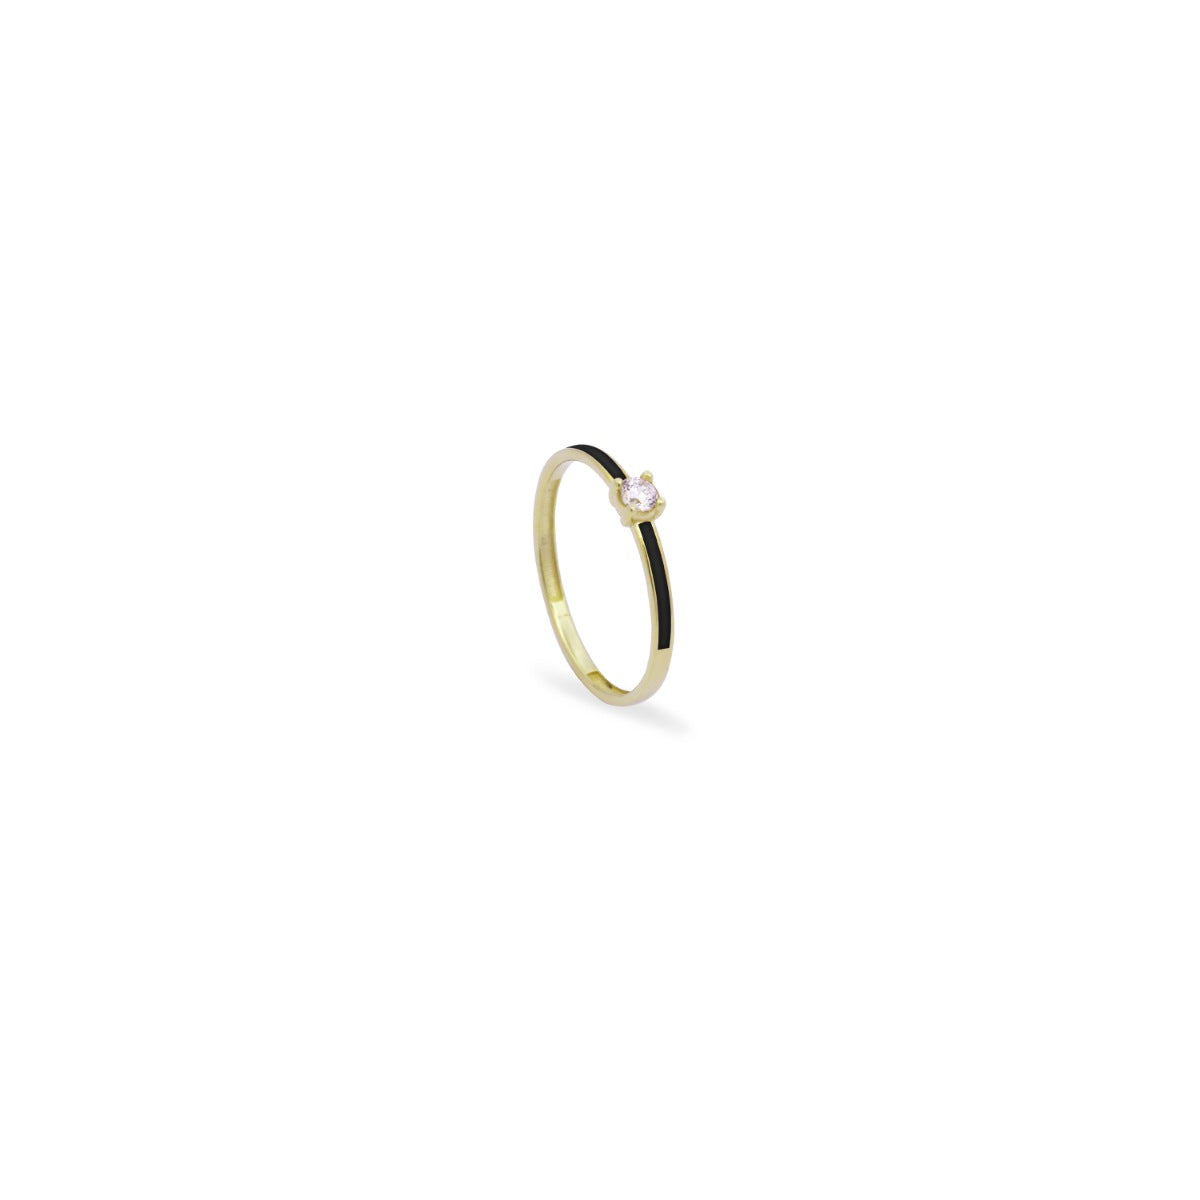 Rings - Enamel and lab-grown diamond ring - ORO18KT - 2 | Rue des Mille